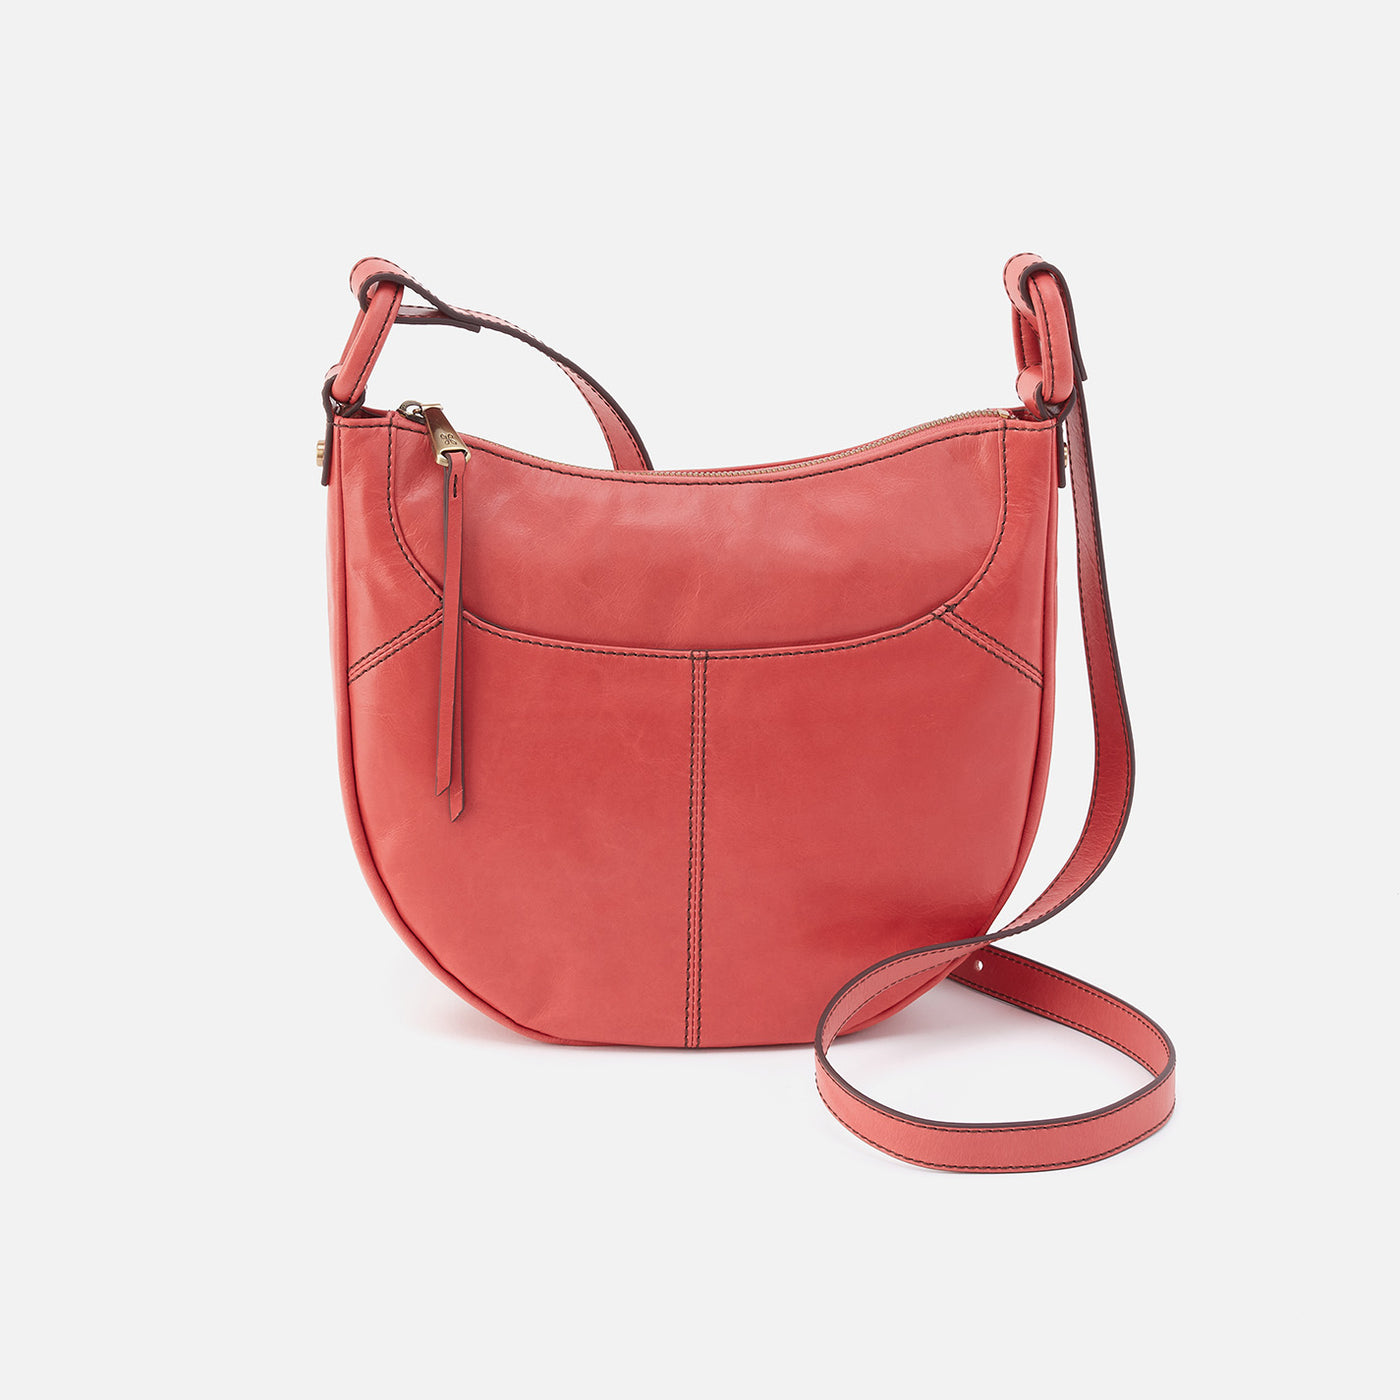 Sheila Scoop Crossbody in Polished Leather - Cherry Blossom